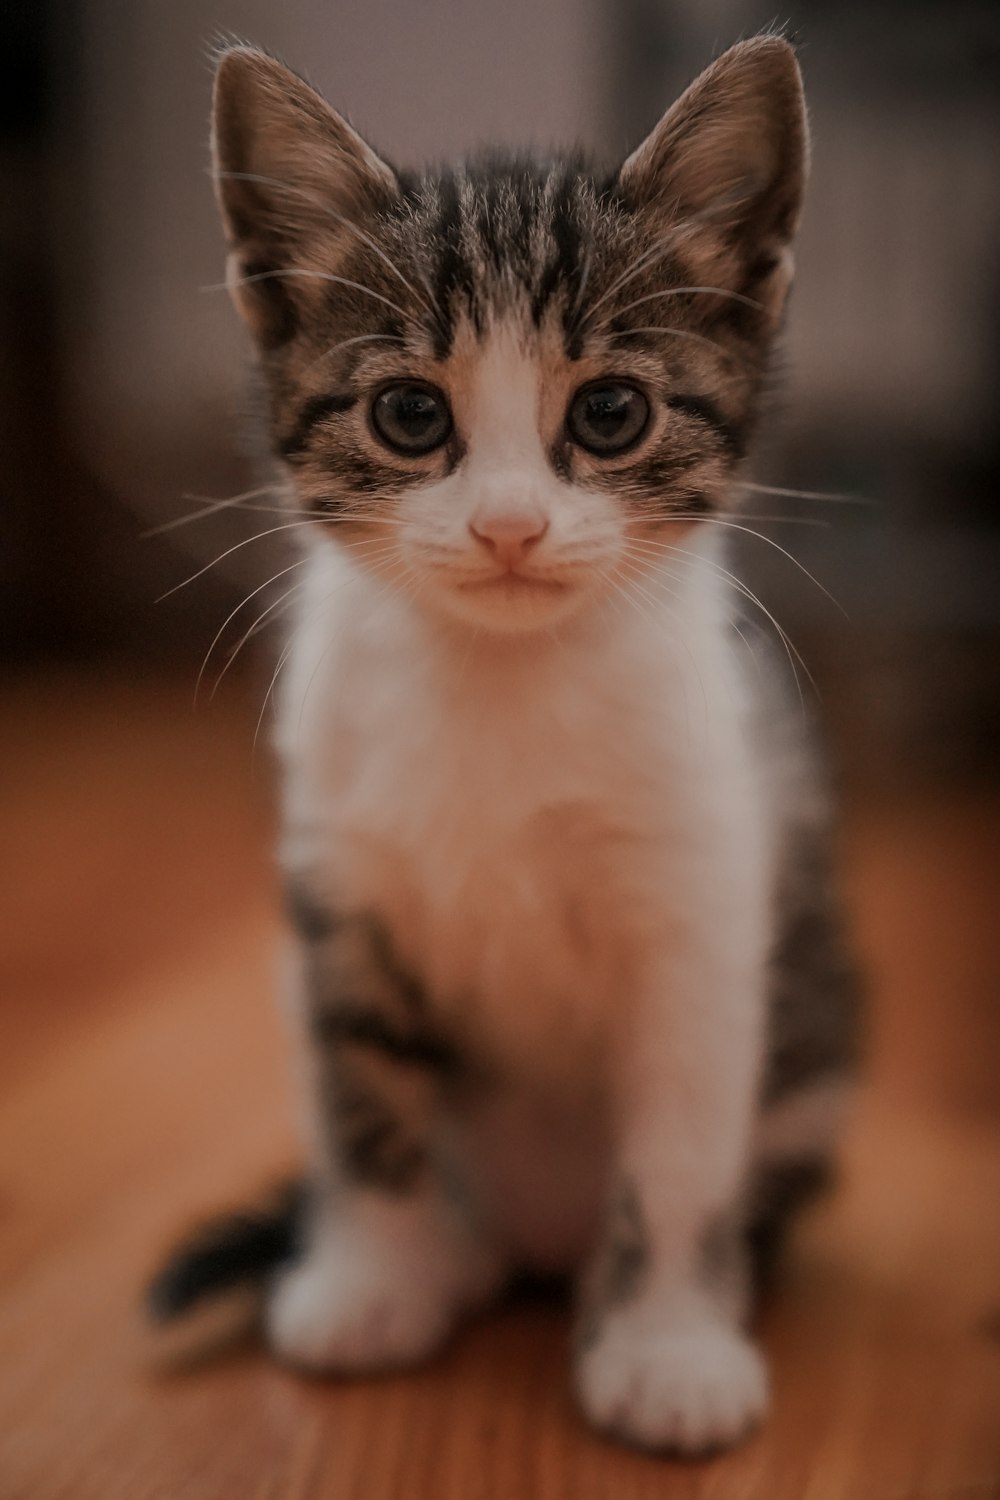 1500+ Funny Cat Pictures Download Free Images on Unsplash, cat pfp